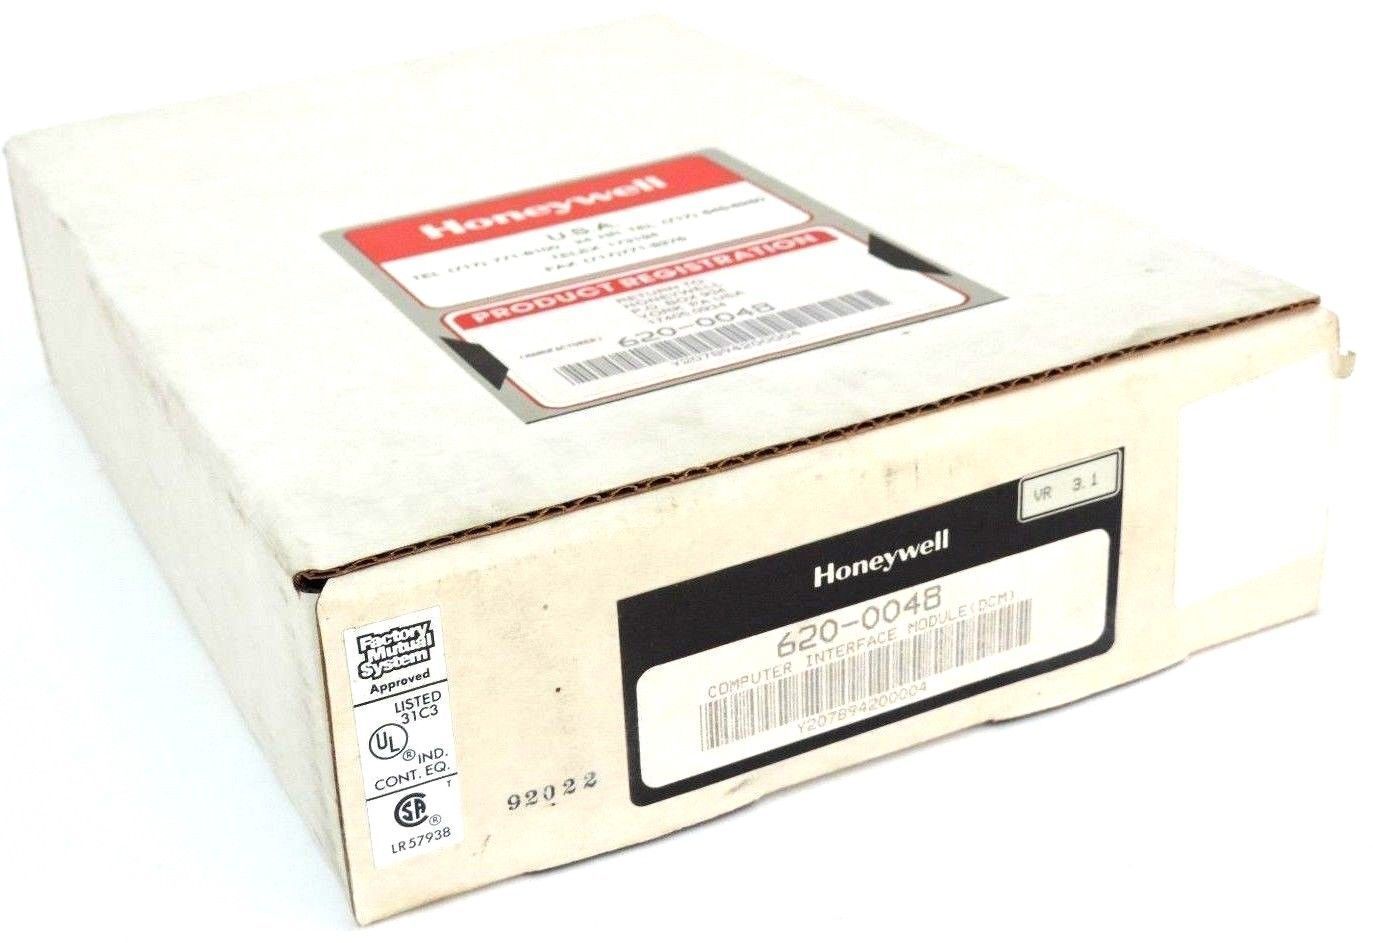 FACTORY SEALED HONEYWELL 620-0048 DATA COLLECTION MODULE 6200048 VR. 3.1